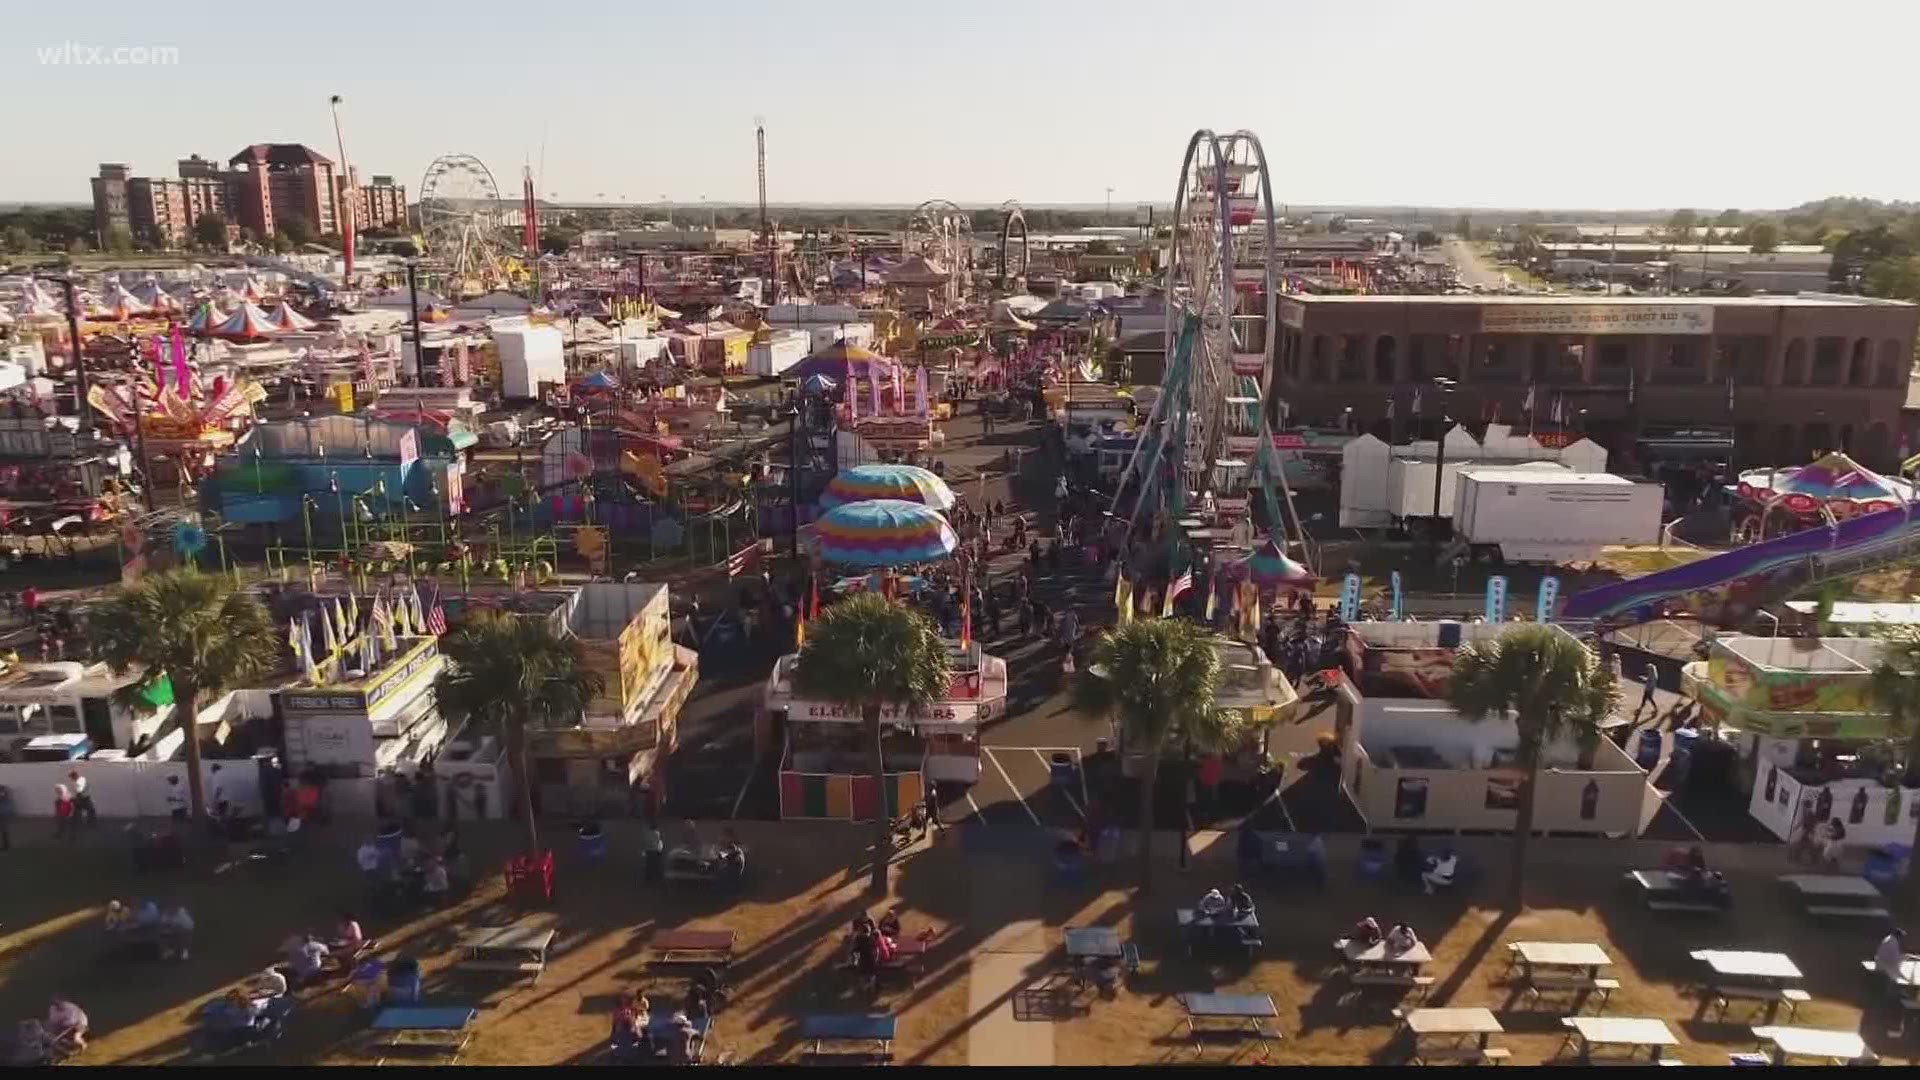 Organizers planning for a more 'normal' SC State Fair in 2021